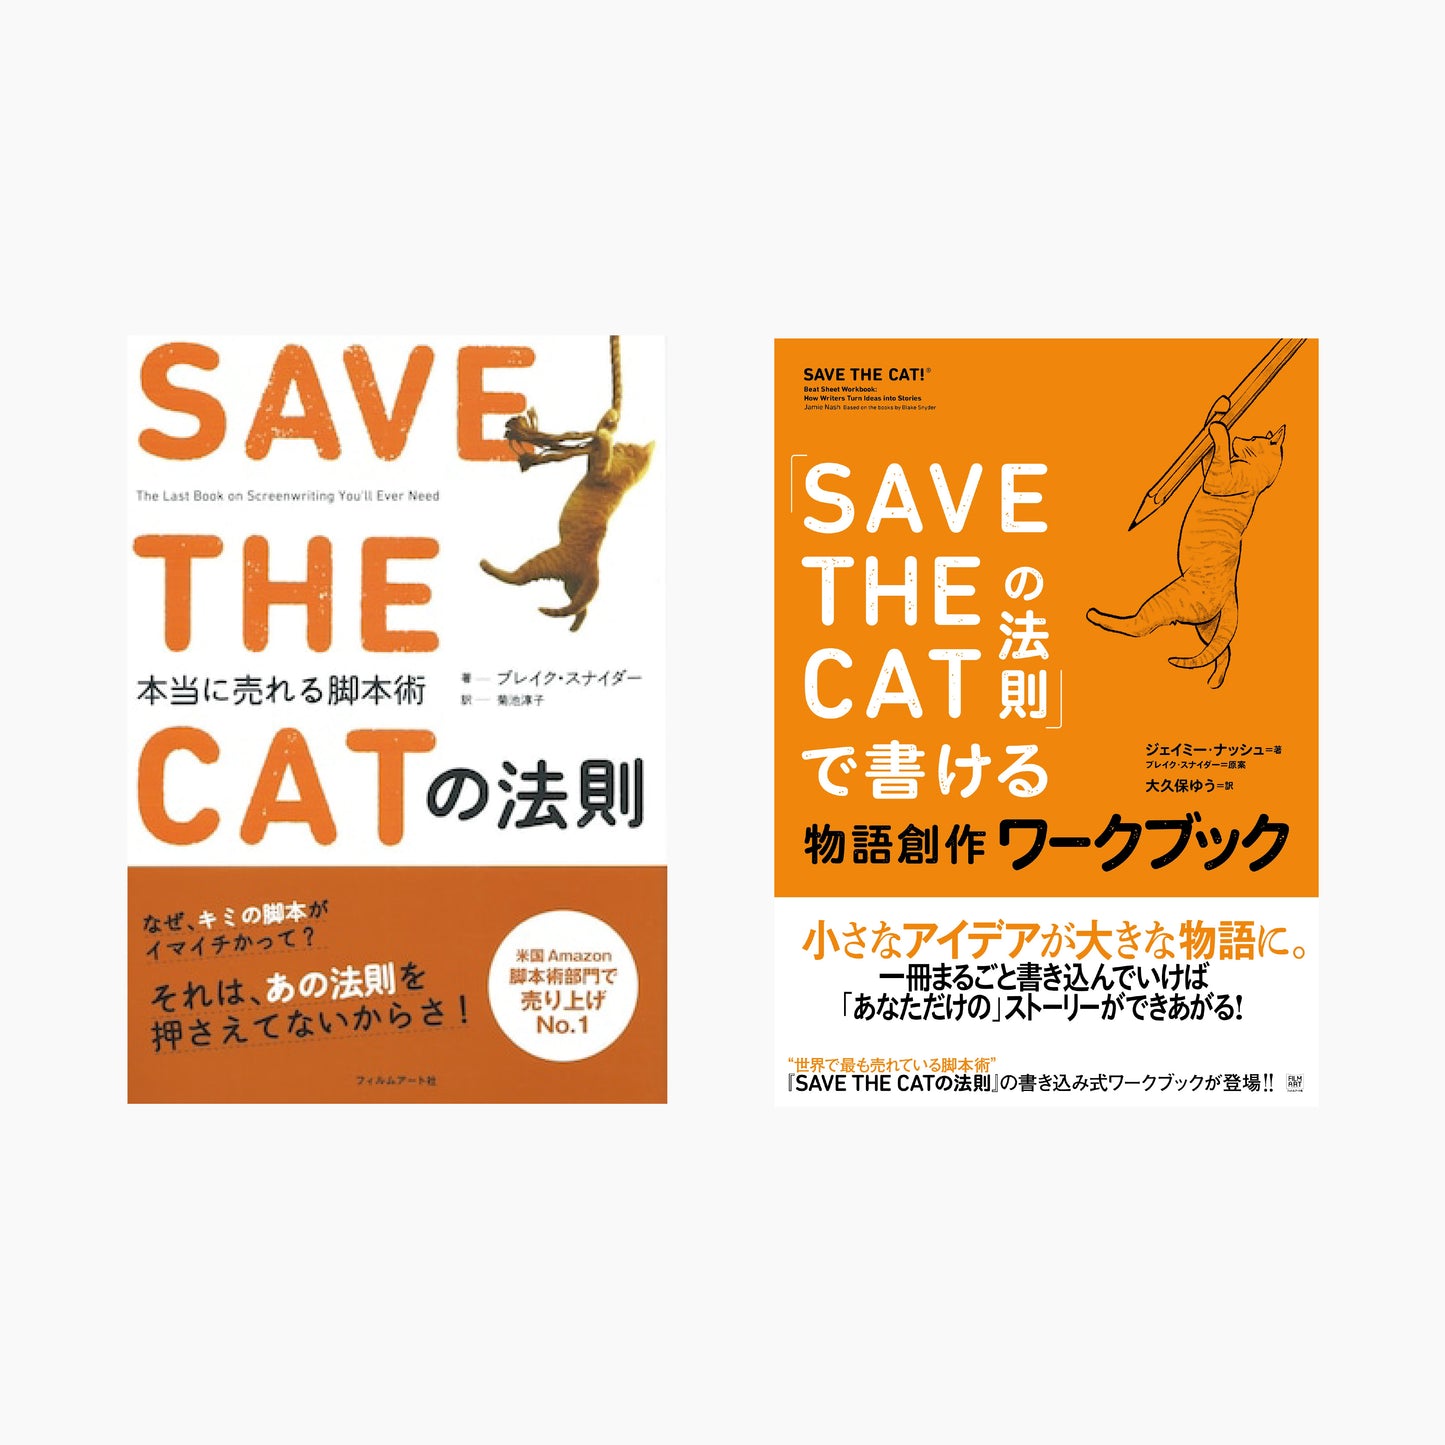 「SAVE THE CATの法則」本編＆ワークブック2冊セット